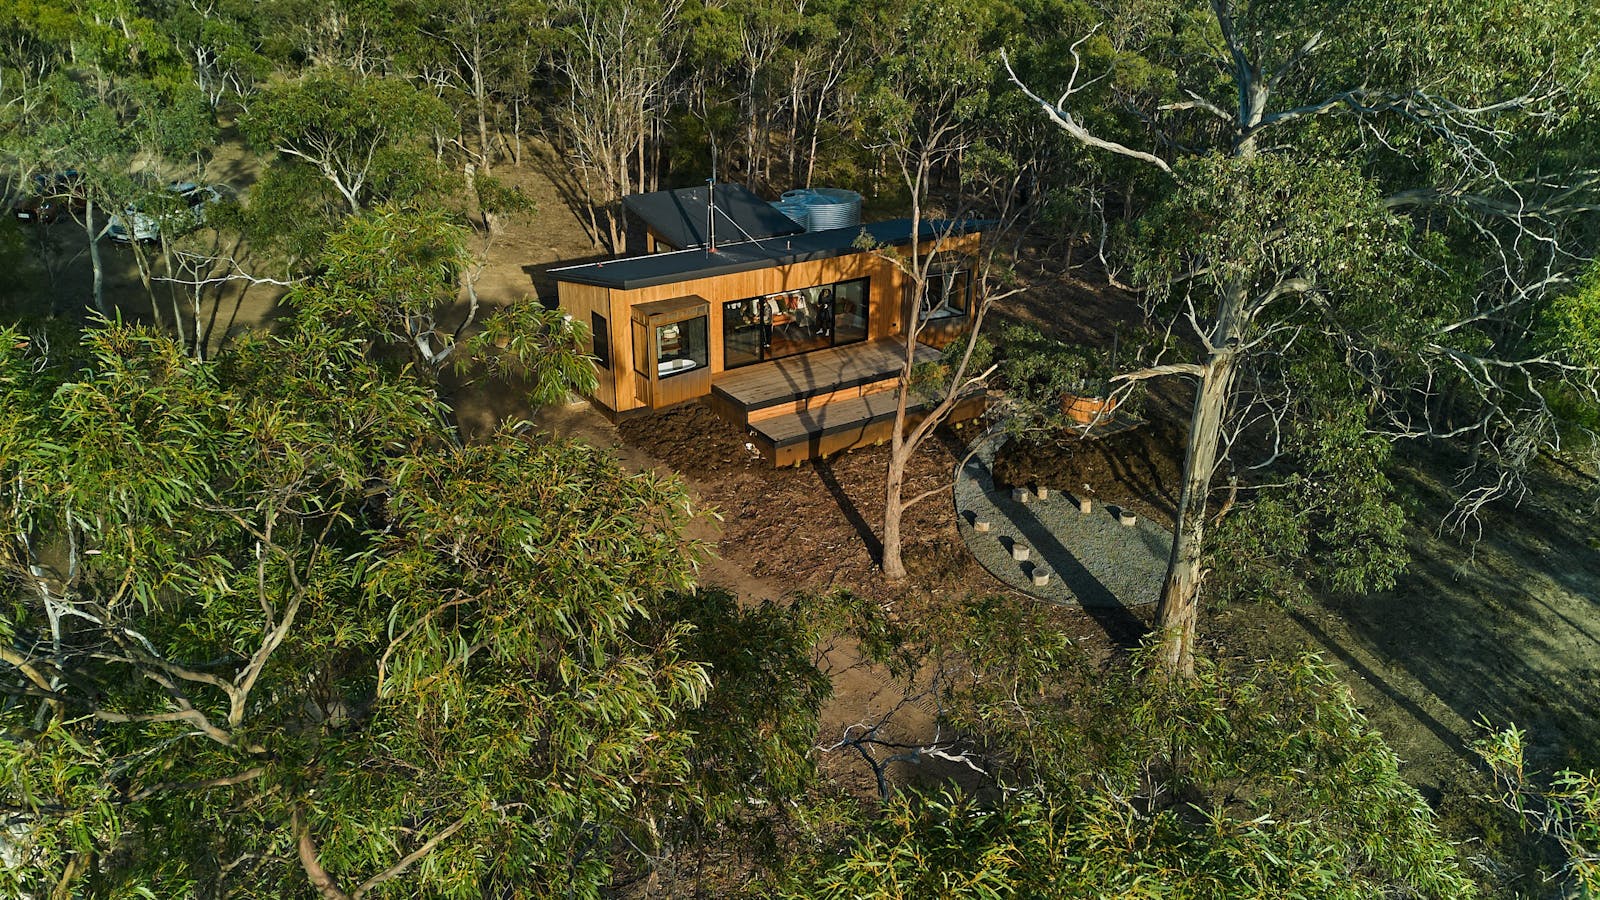 The Croft is nestled amongst Gums for absolute seclusion